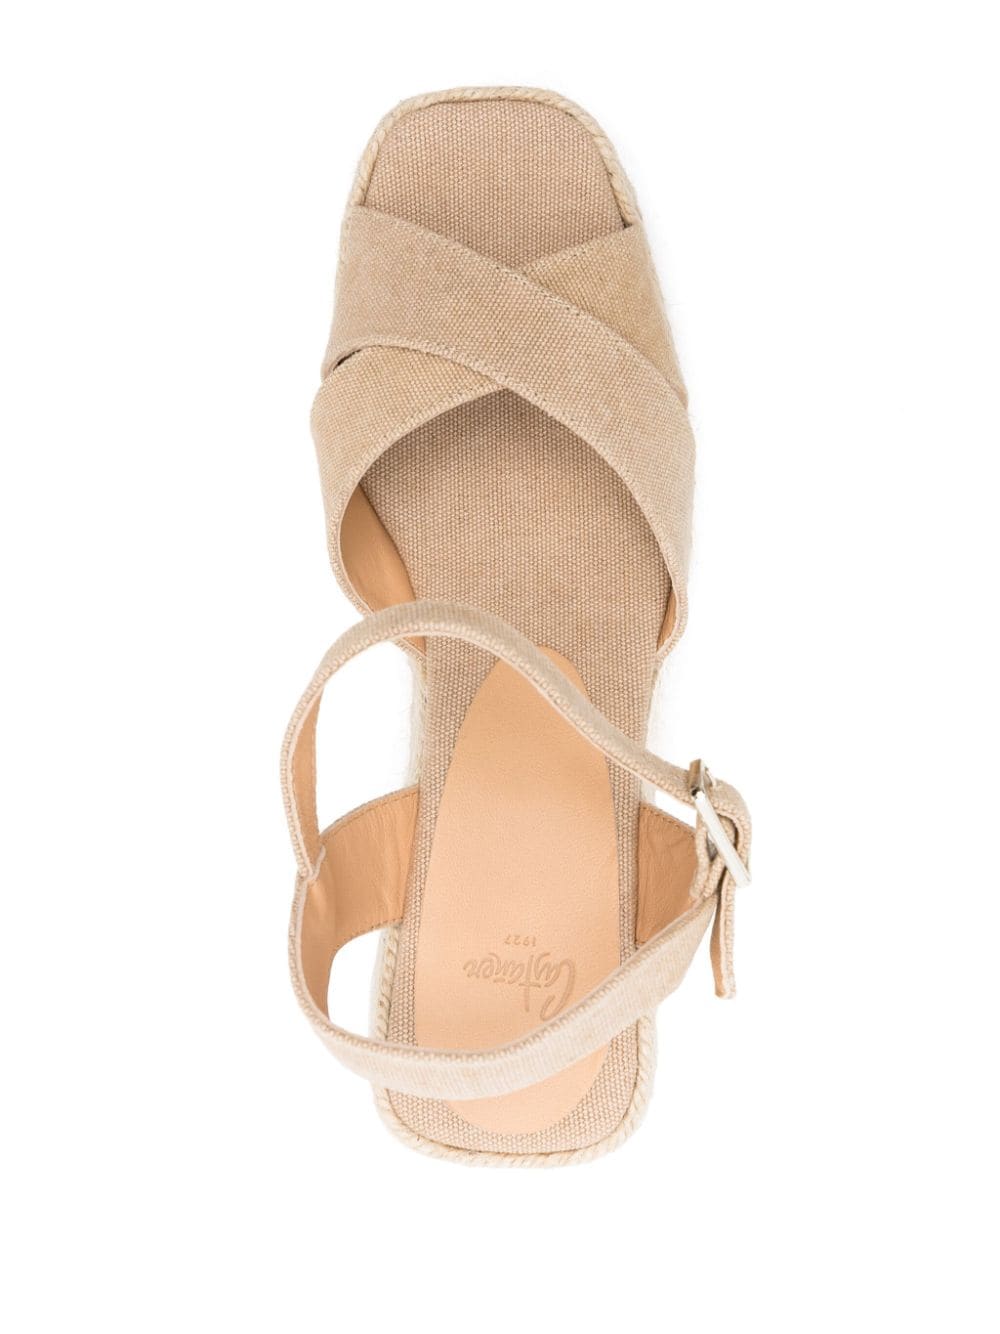 THEA 80MM WEDGE SANDALS